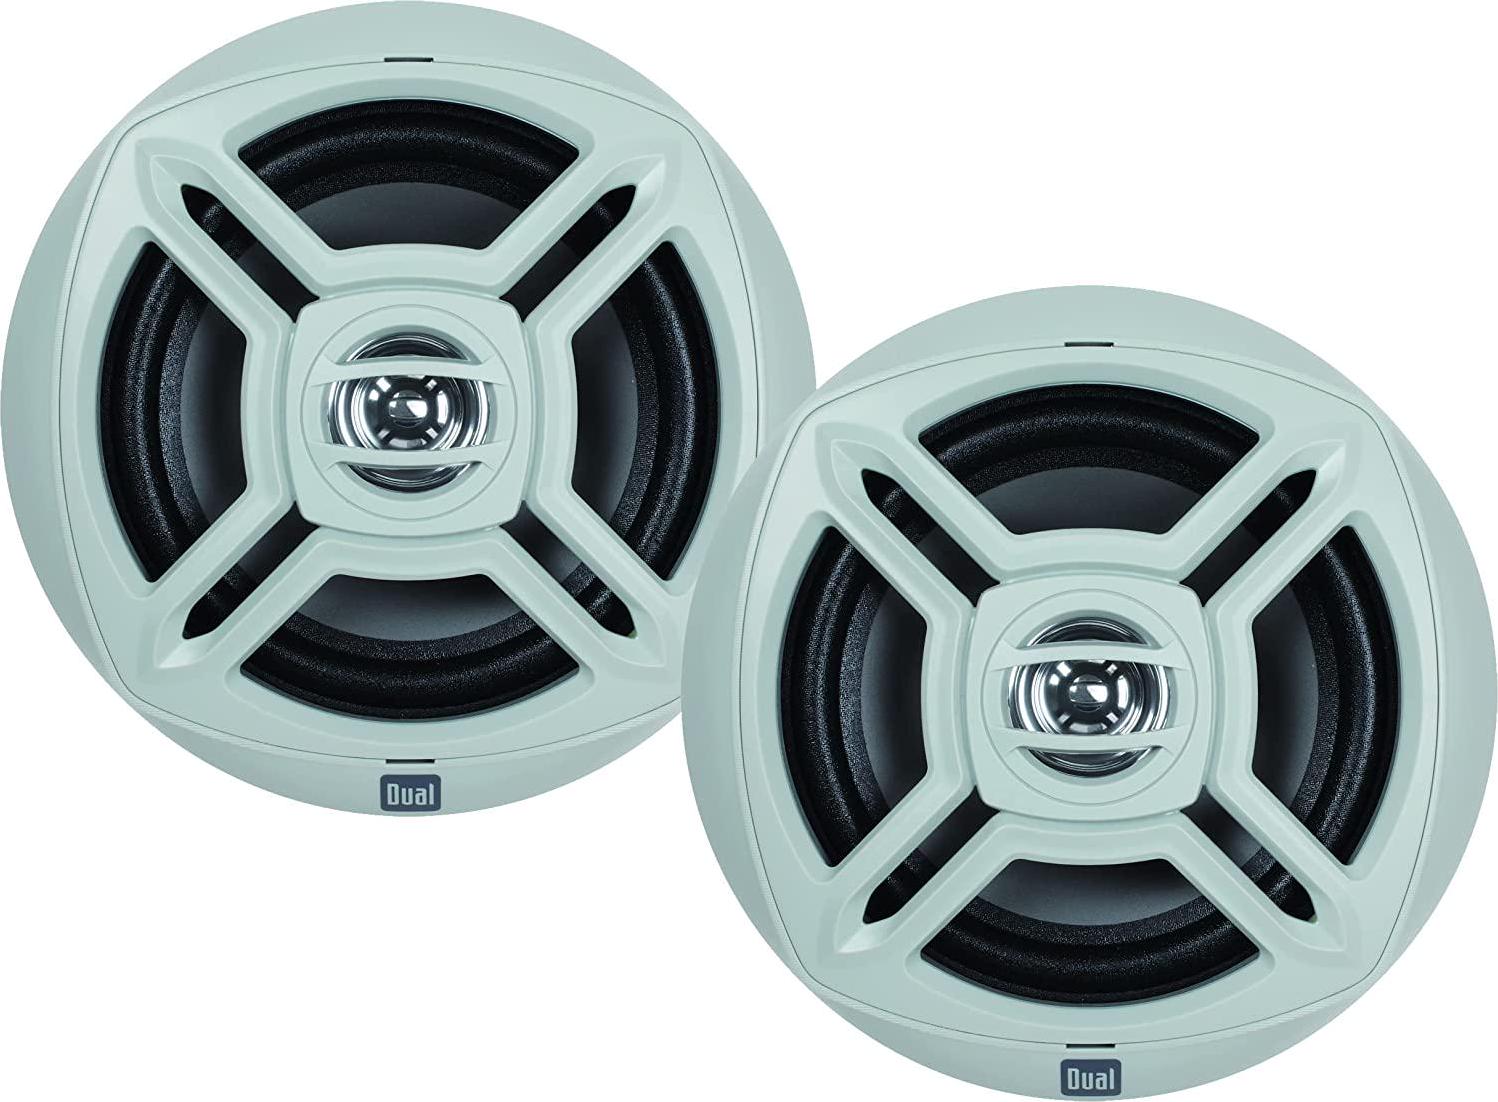 Dual Electronics, Dual Electronics WSM651 Two 6.5 inch Water Resistant Dual Cone High Performance Marine Speakers with 100 Watts of Peak Power